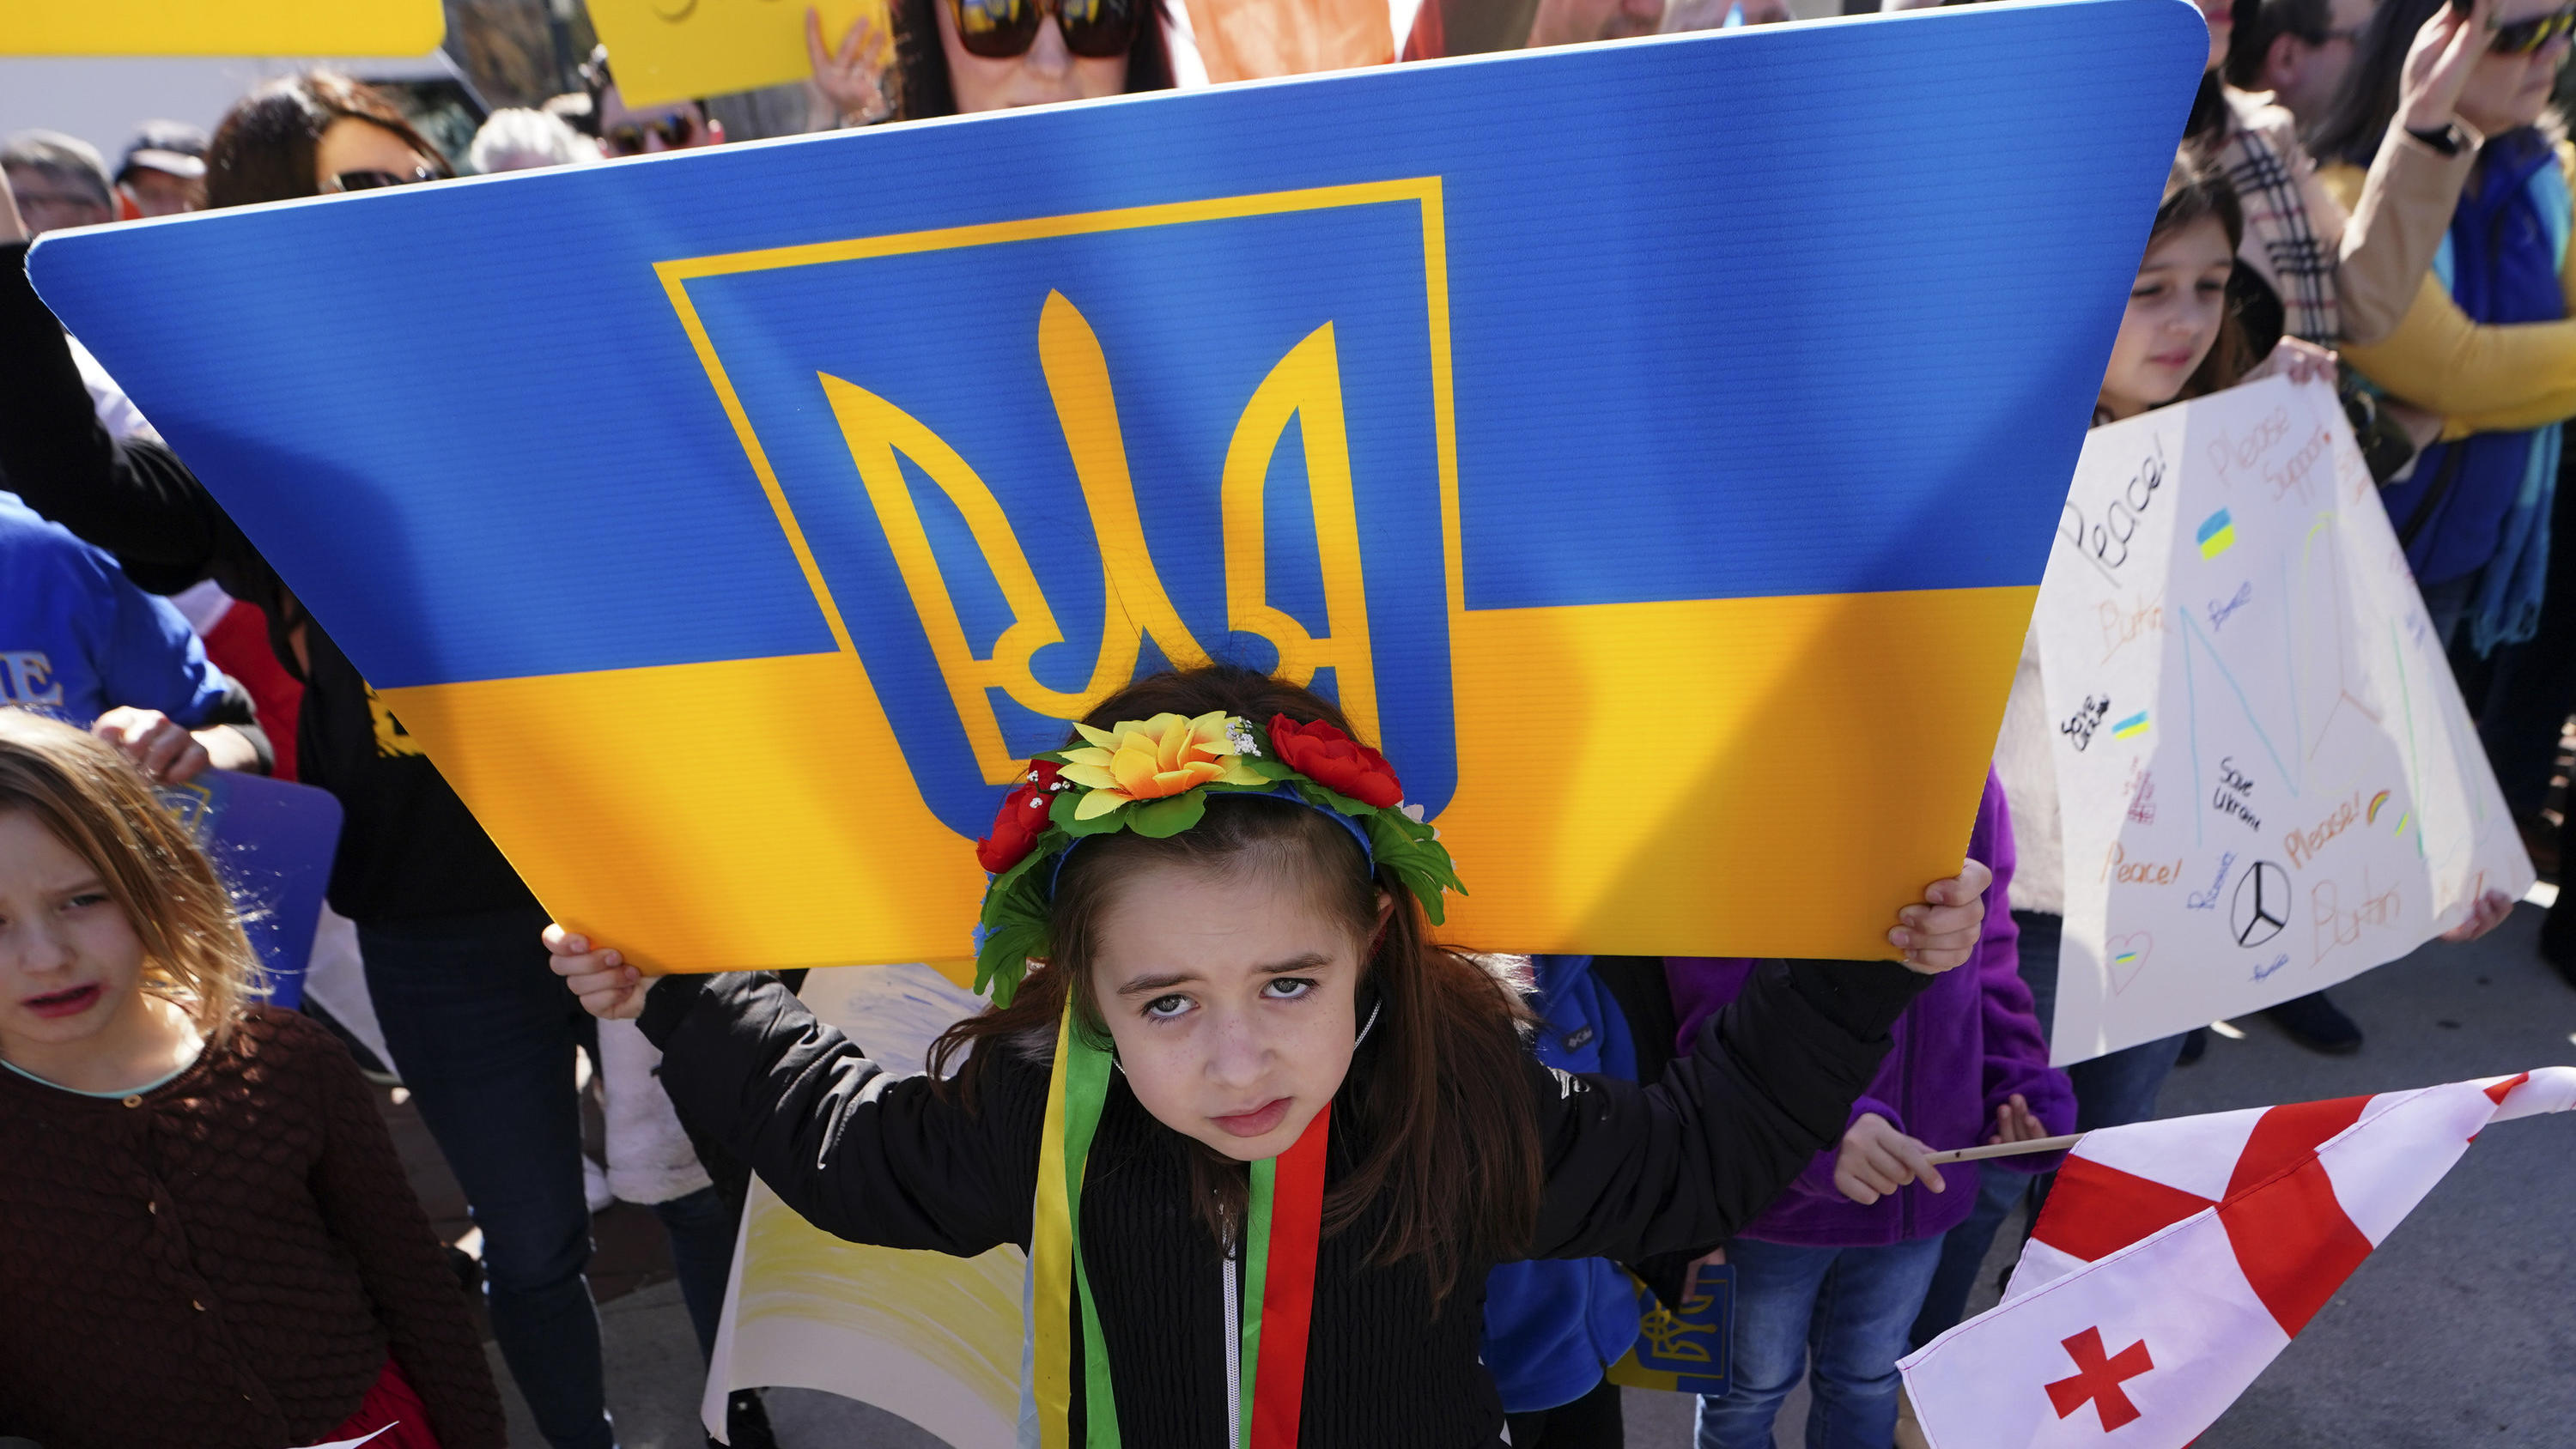 Six-year-old Grace Mokiienko holds sign during a rally to show support for Ukraine Saturday, Feb. 26, 2022, in Atlanta. Grace's father is a Ukrainian immigrant and still has family in Ukraine. Ukrainians in the United States are praying for friends a